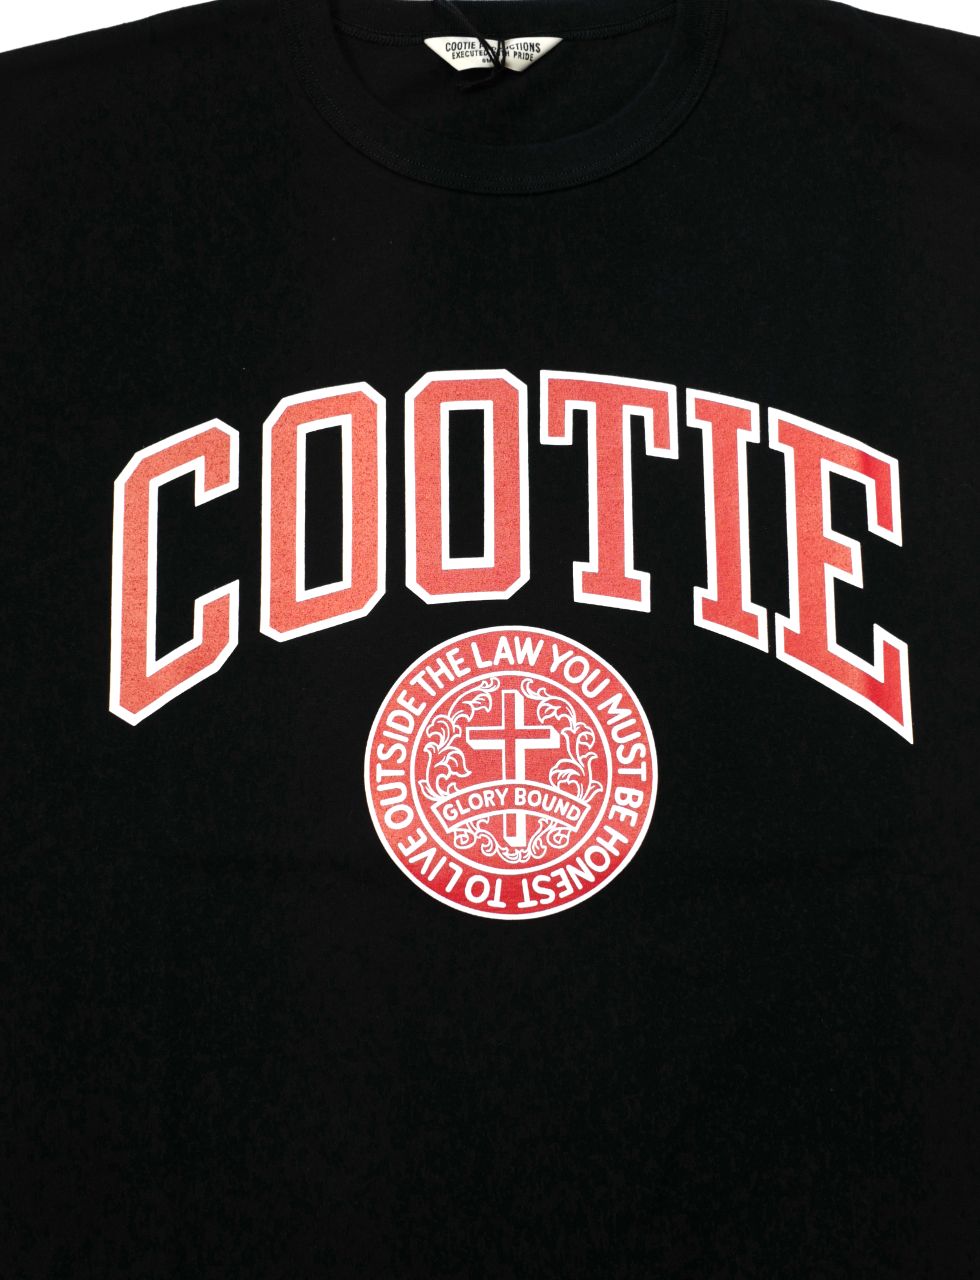 COOTIE PRODUCTIONS - Print Oversized L/S Tee (COLLEGE) (BLACK ...